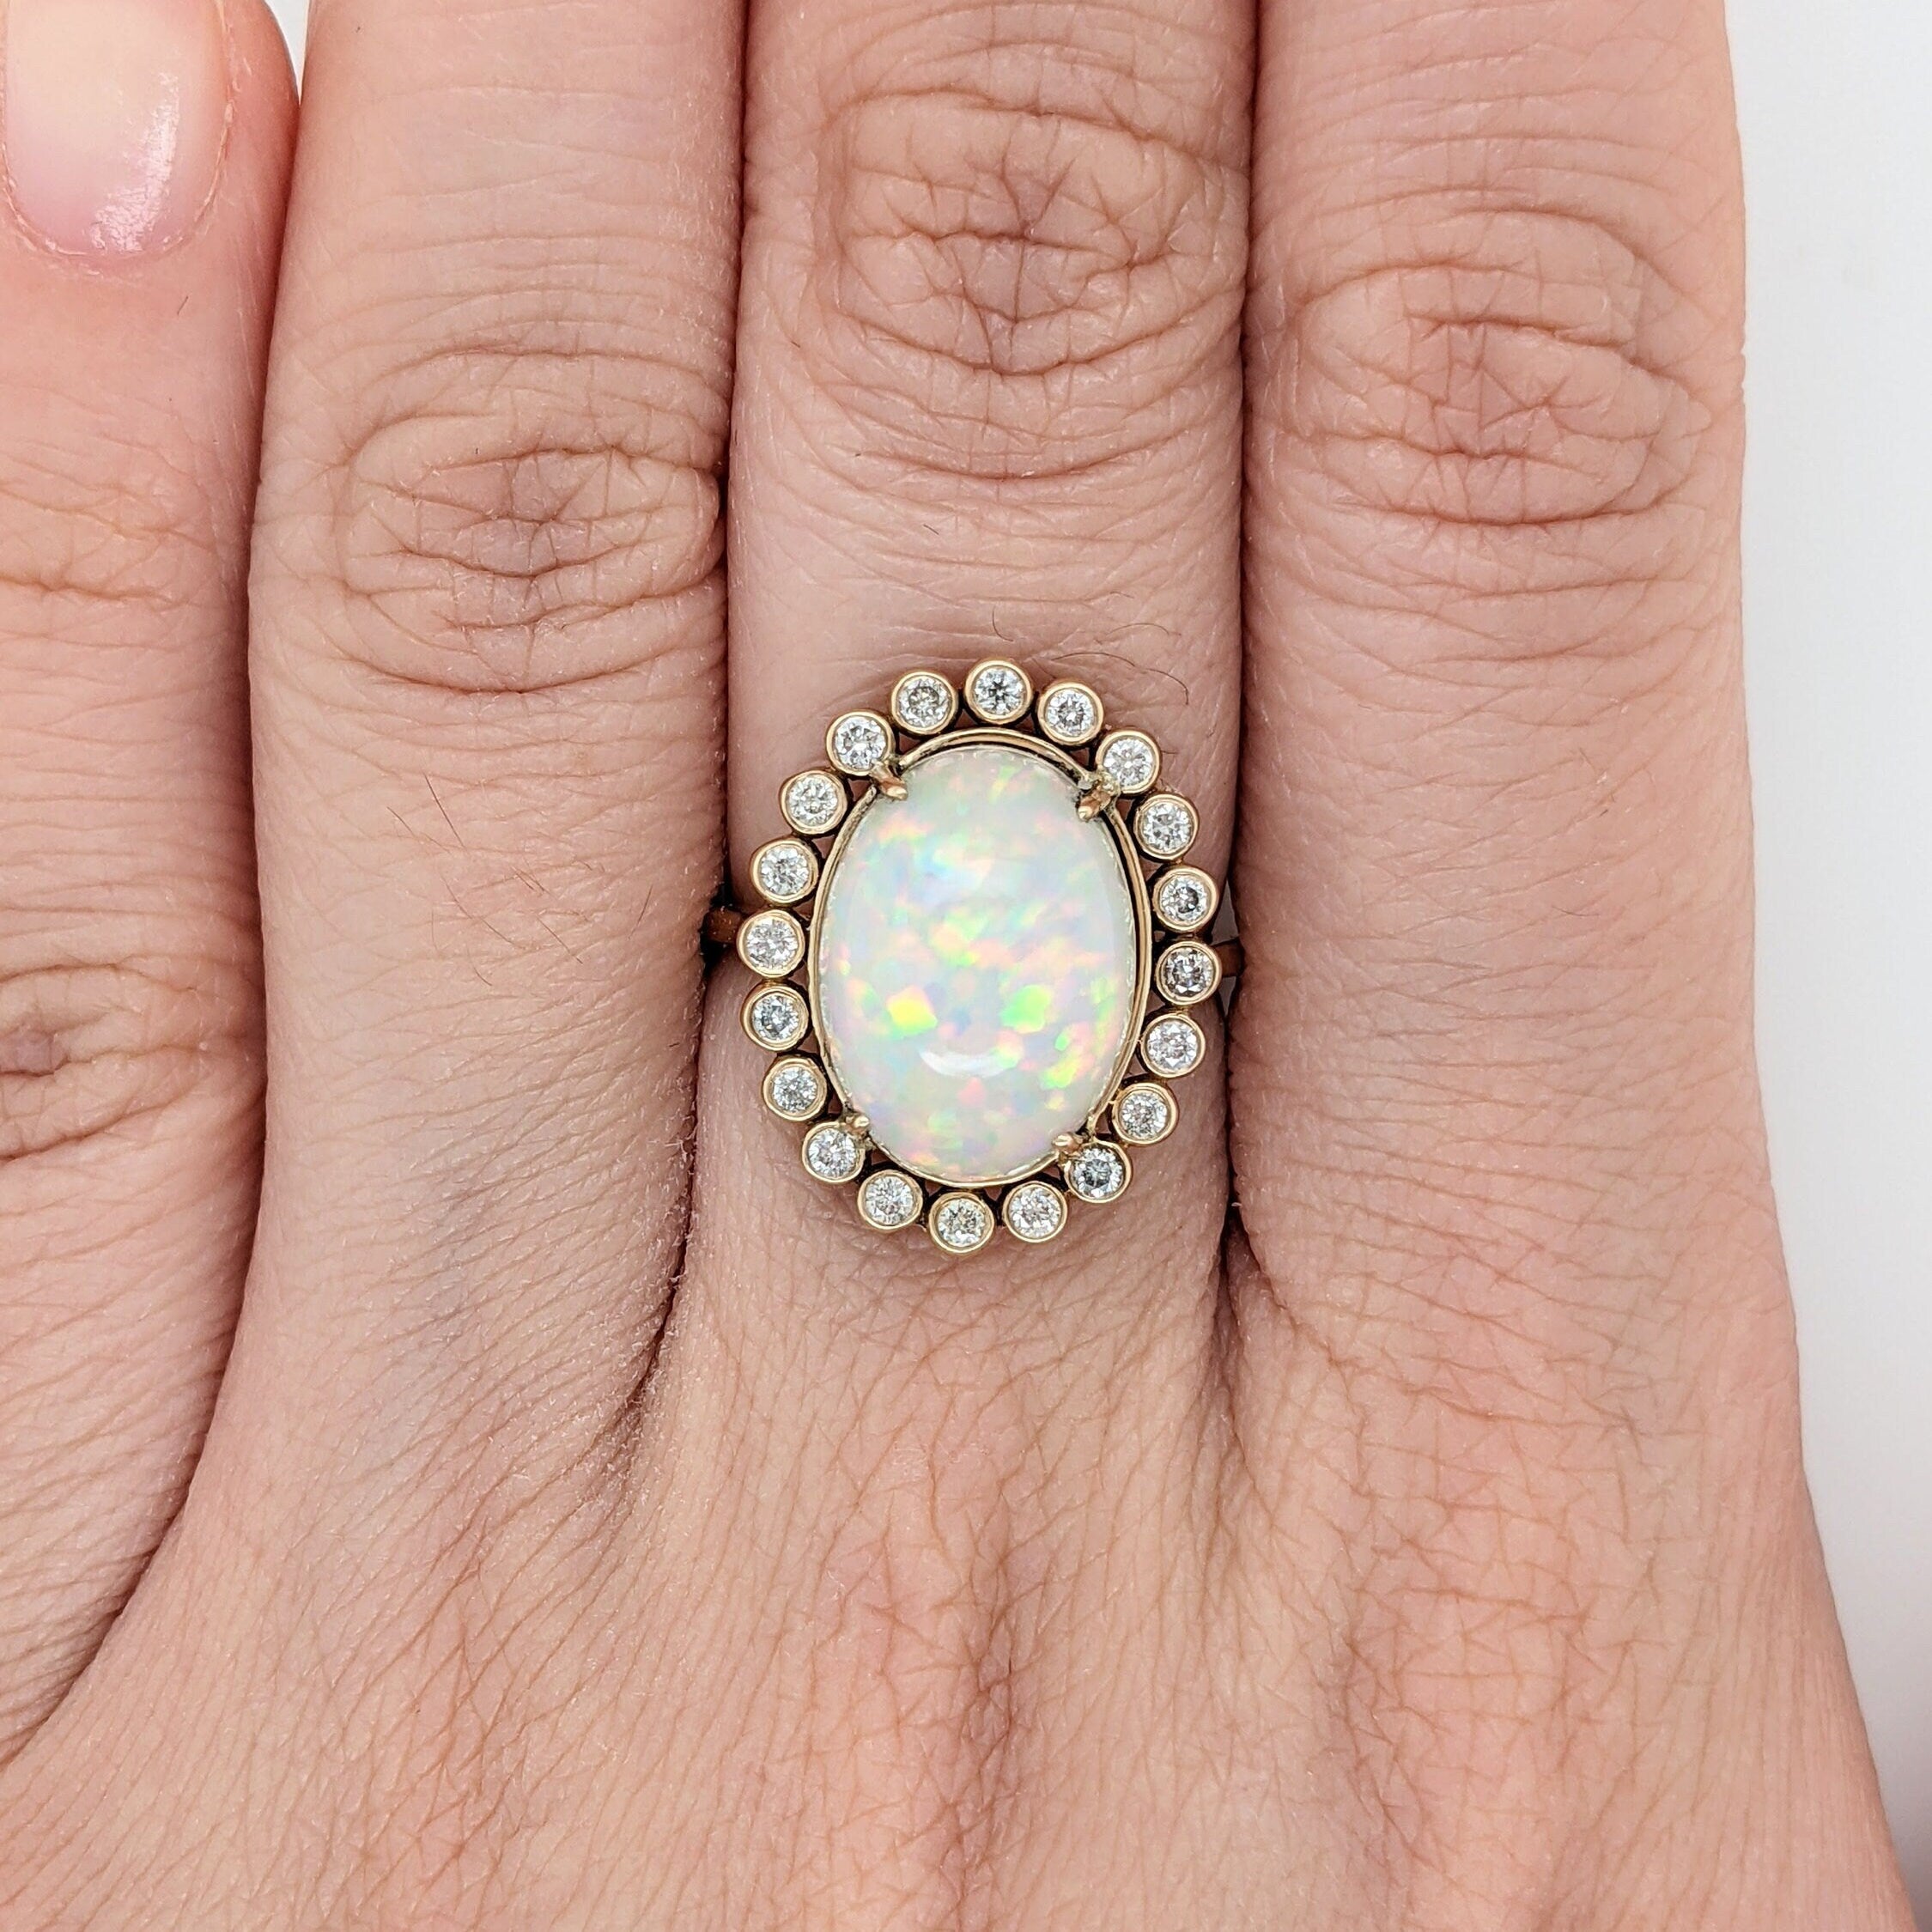 Stunning Opal Ring in Solid 14k Yellow Gold with Natural Diamond Accents | Oval 14x10mm | October Birthstone | Statement Ring |Ready to Ship